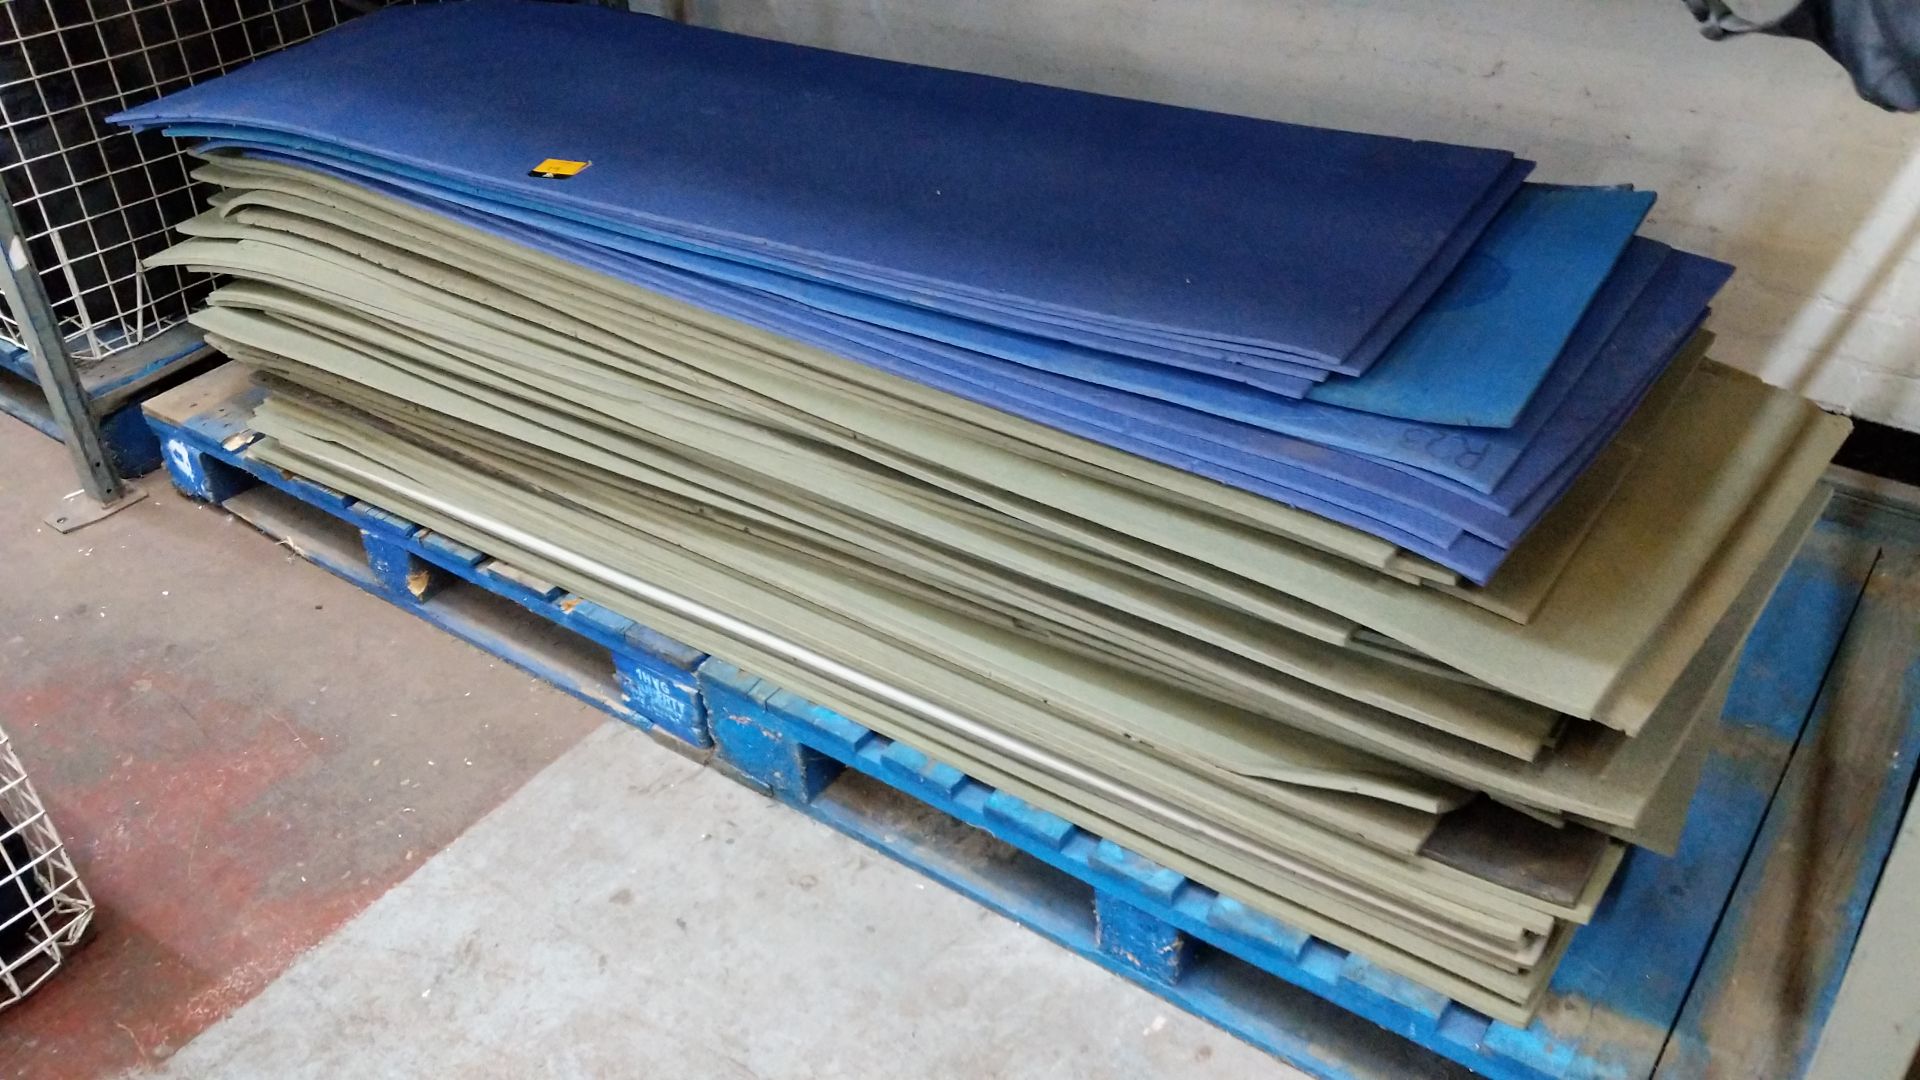 Stack of very approx. 50 foam sleeping mats IMPORTANT: Please remember goods successfully bid upon